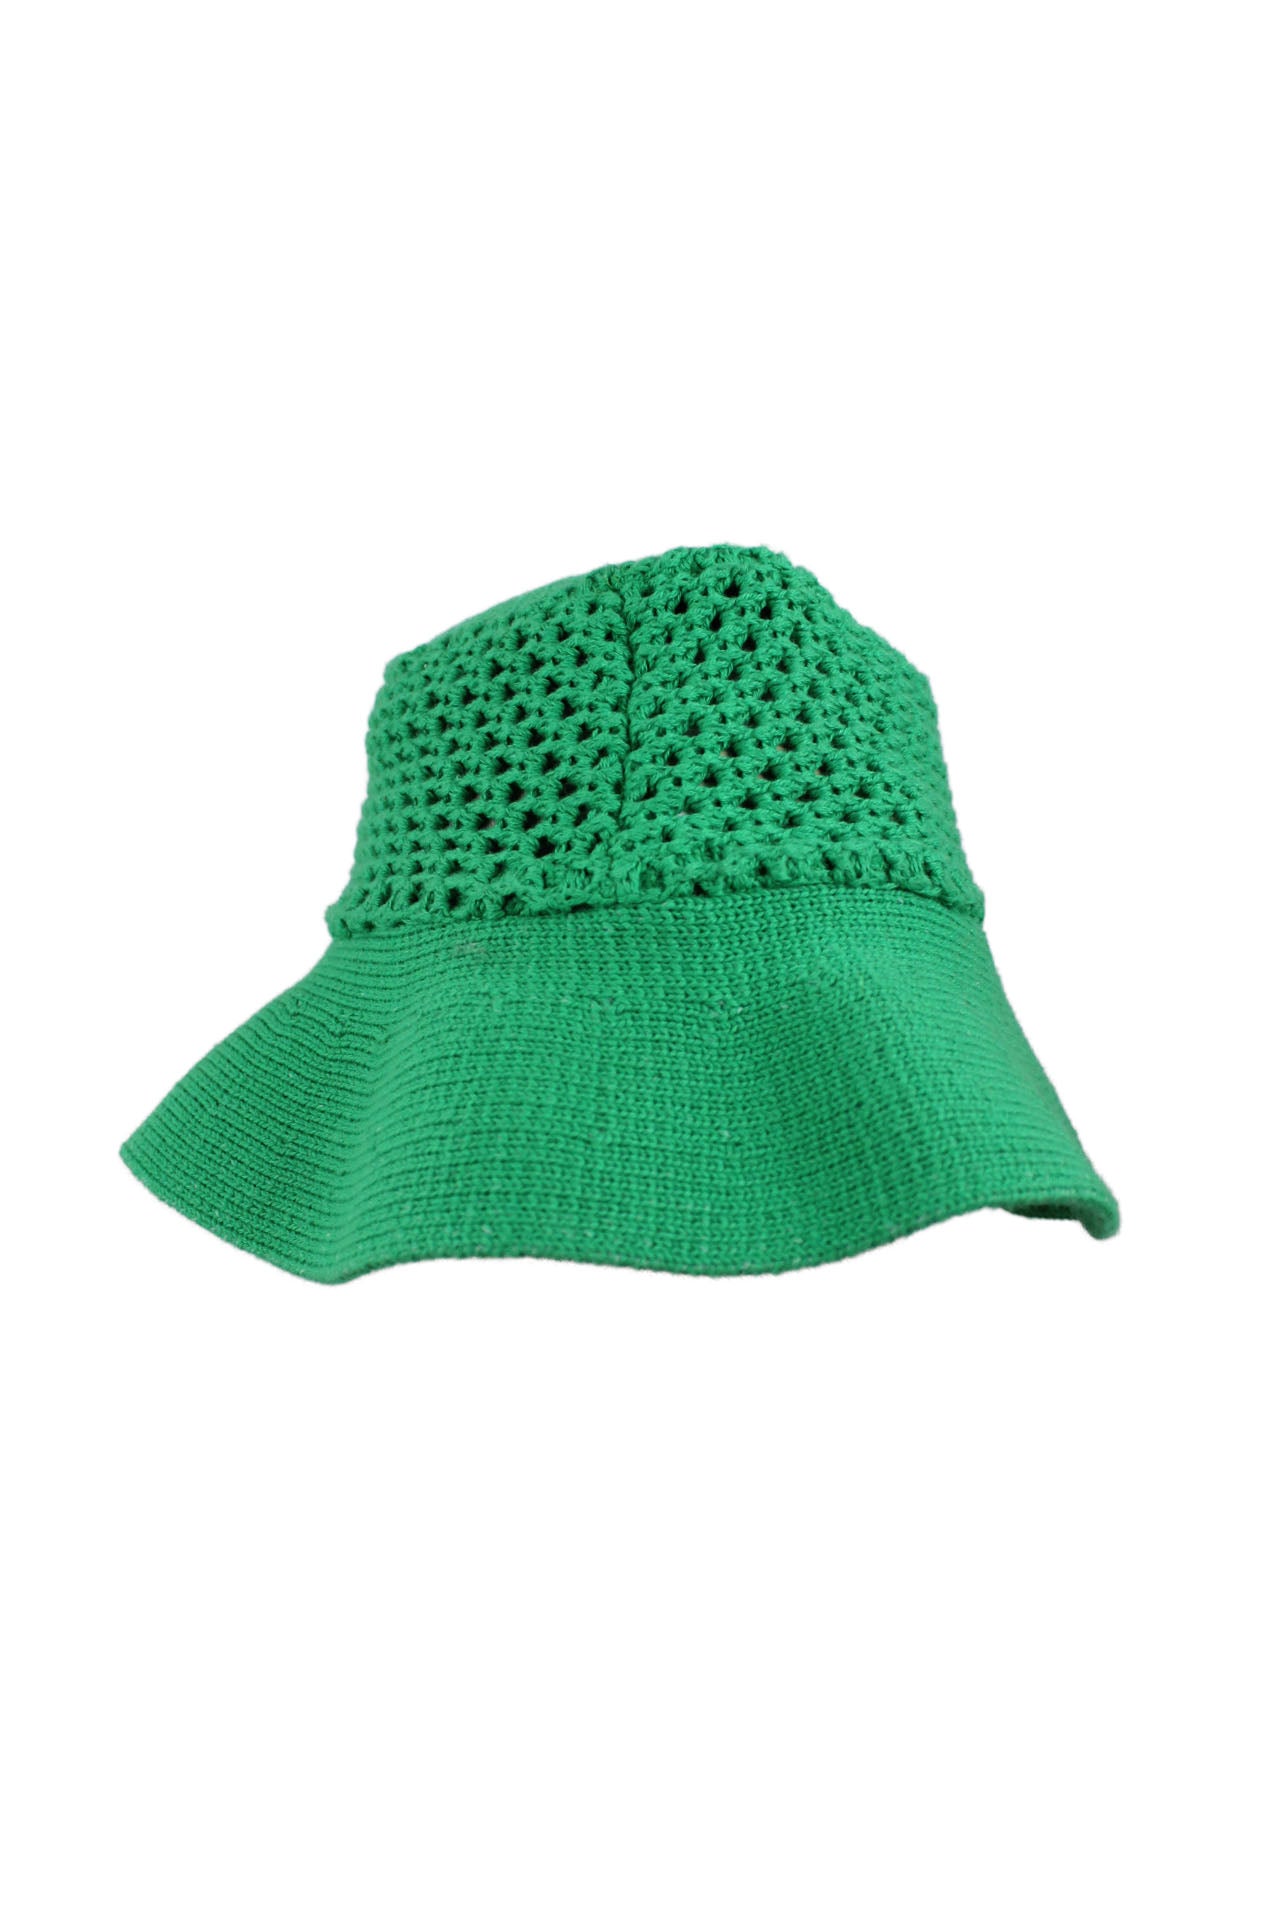 front of maria pavan green crochet bucket hat. features tricot/crochet design throughout, and brim measuring ~3".